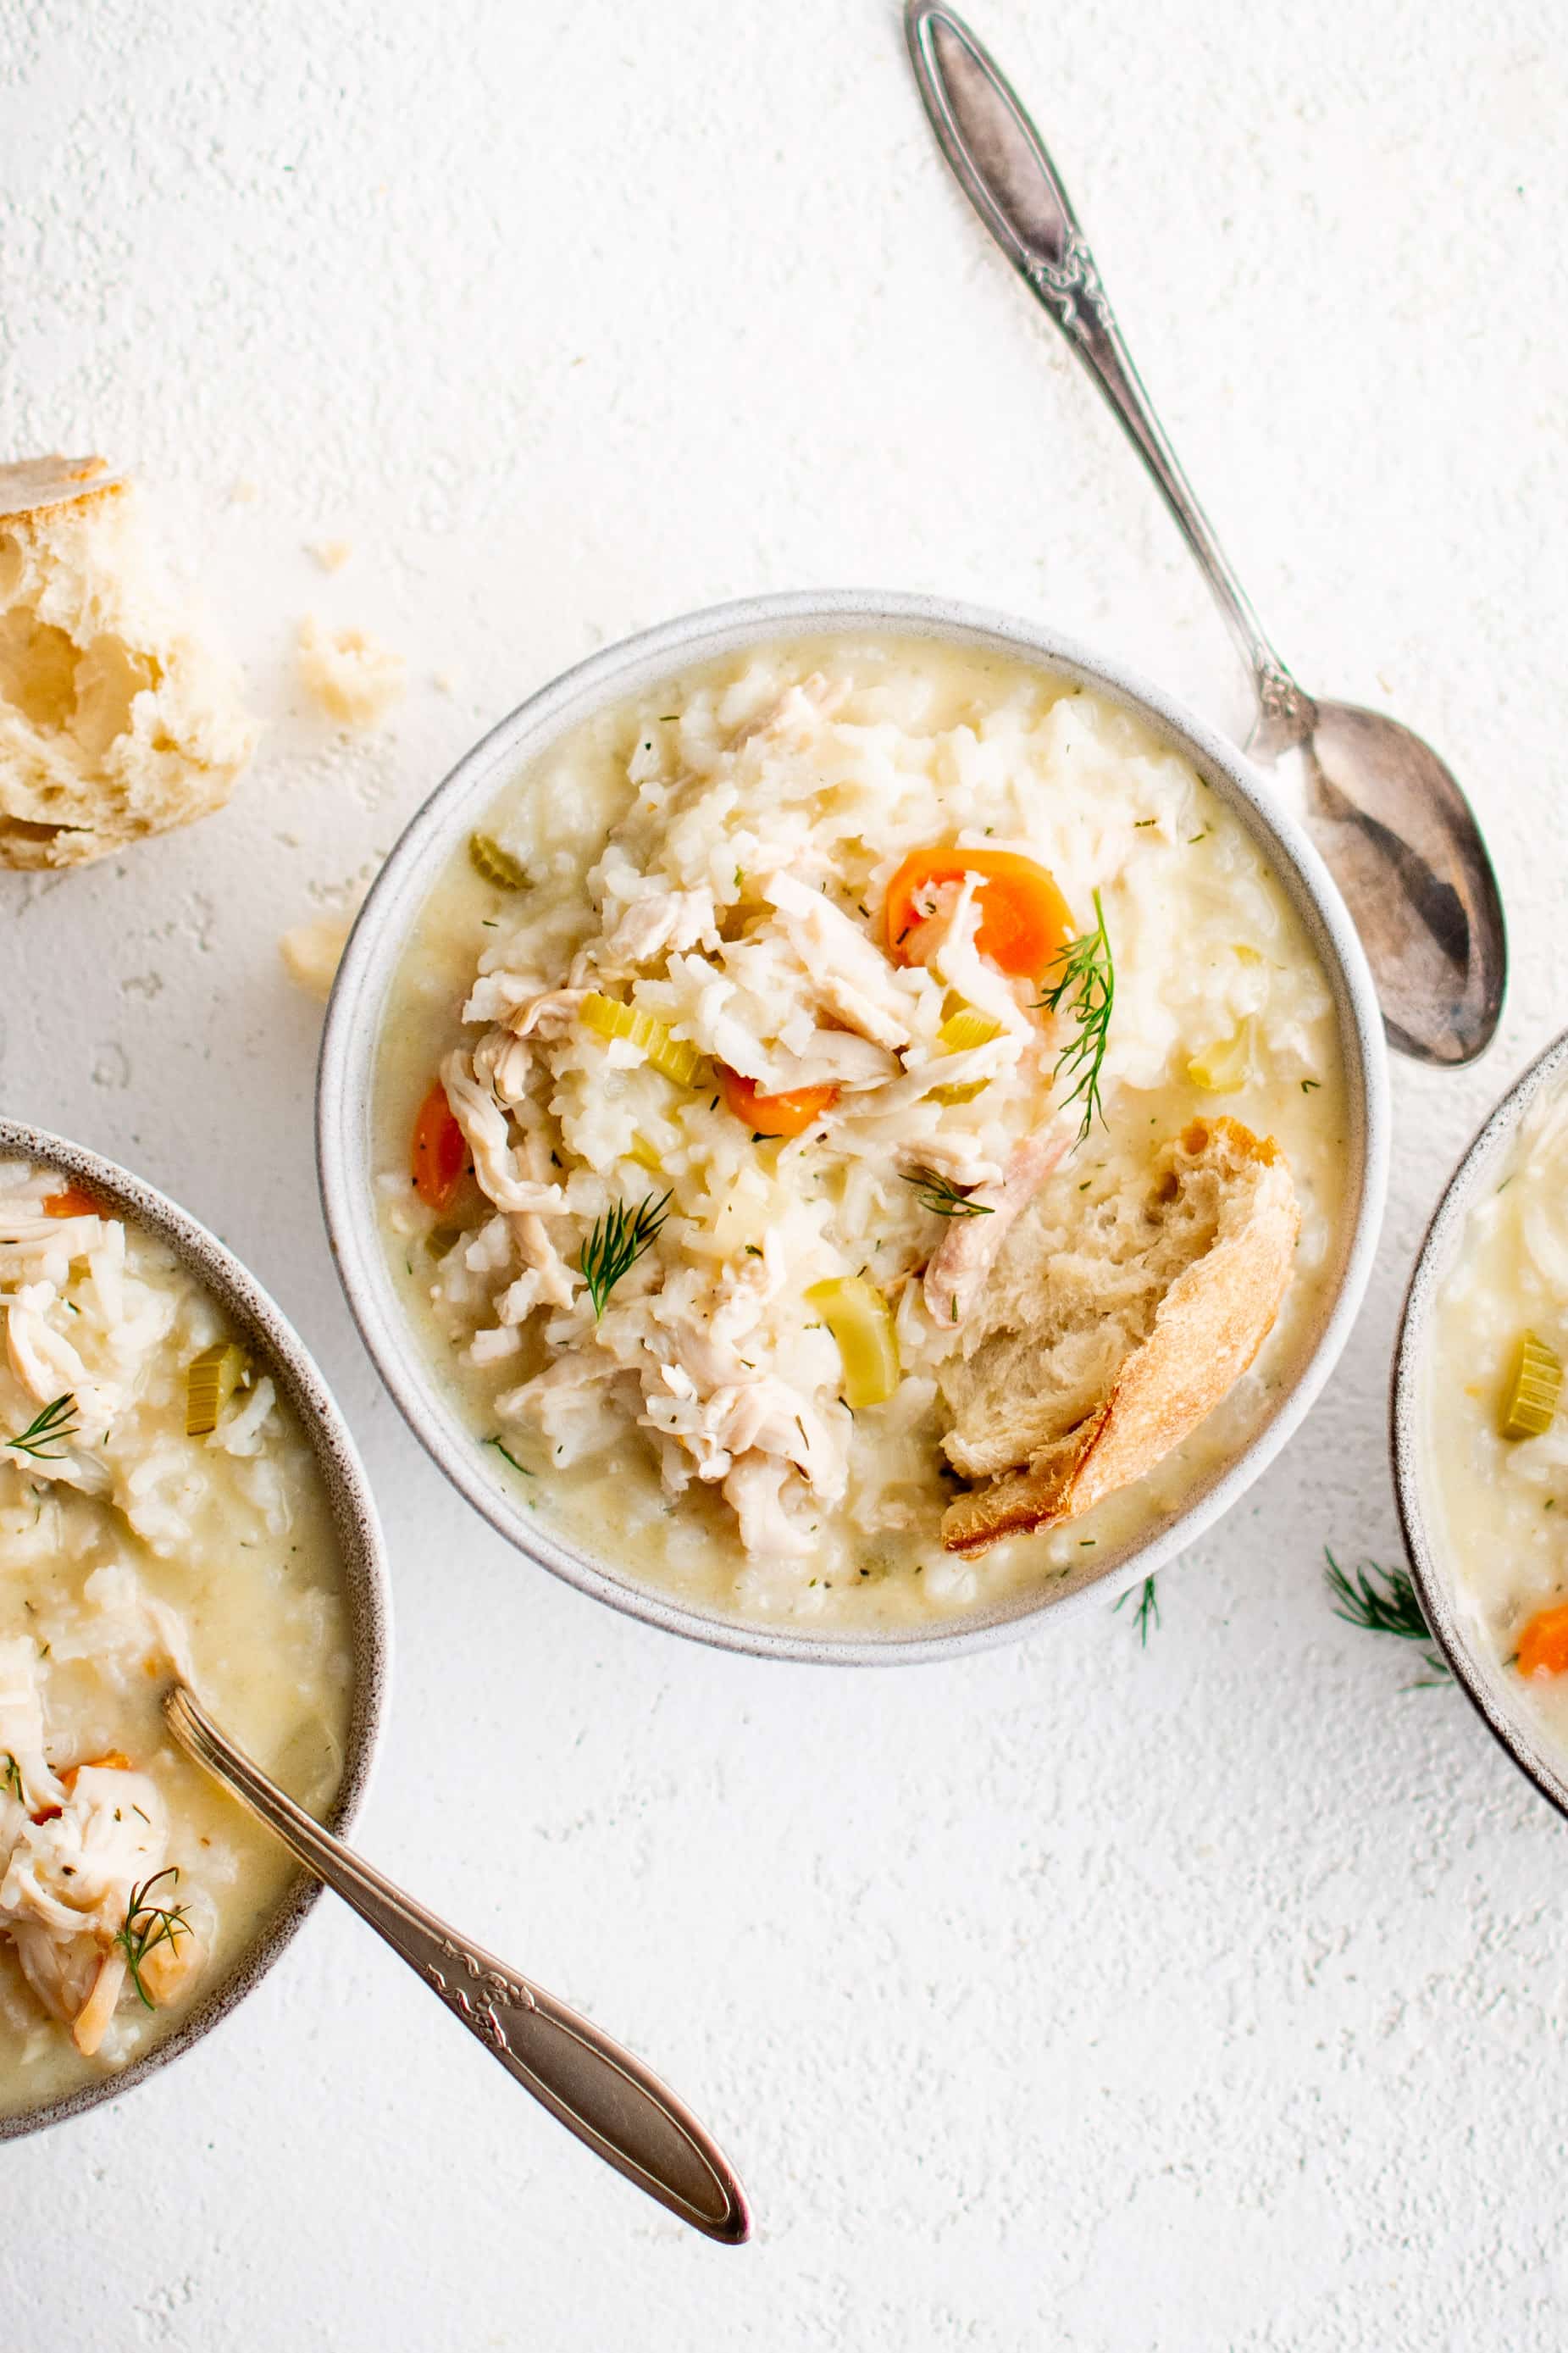 Three white bowls filled with Avgolemono Soup made with rice, shredded chicken , carrots, celery, and chicken broth thickened with a mixture of eggs and lemon juice.